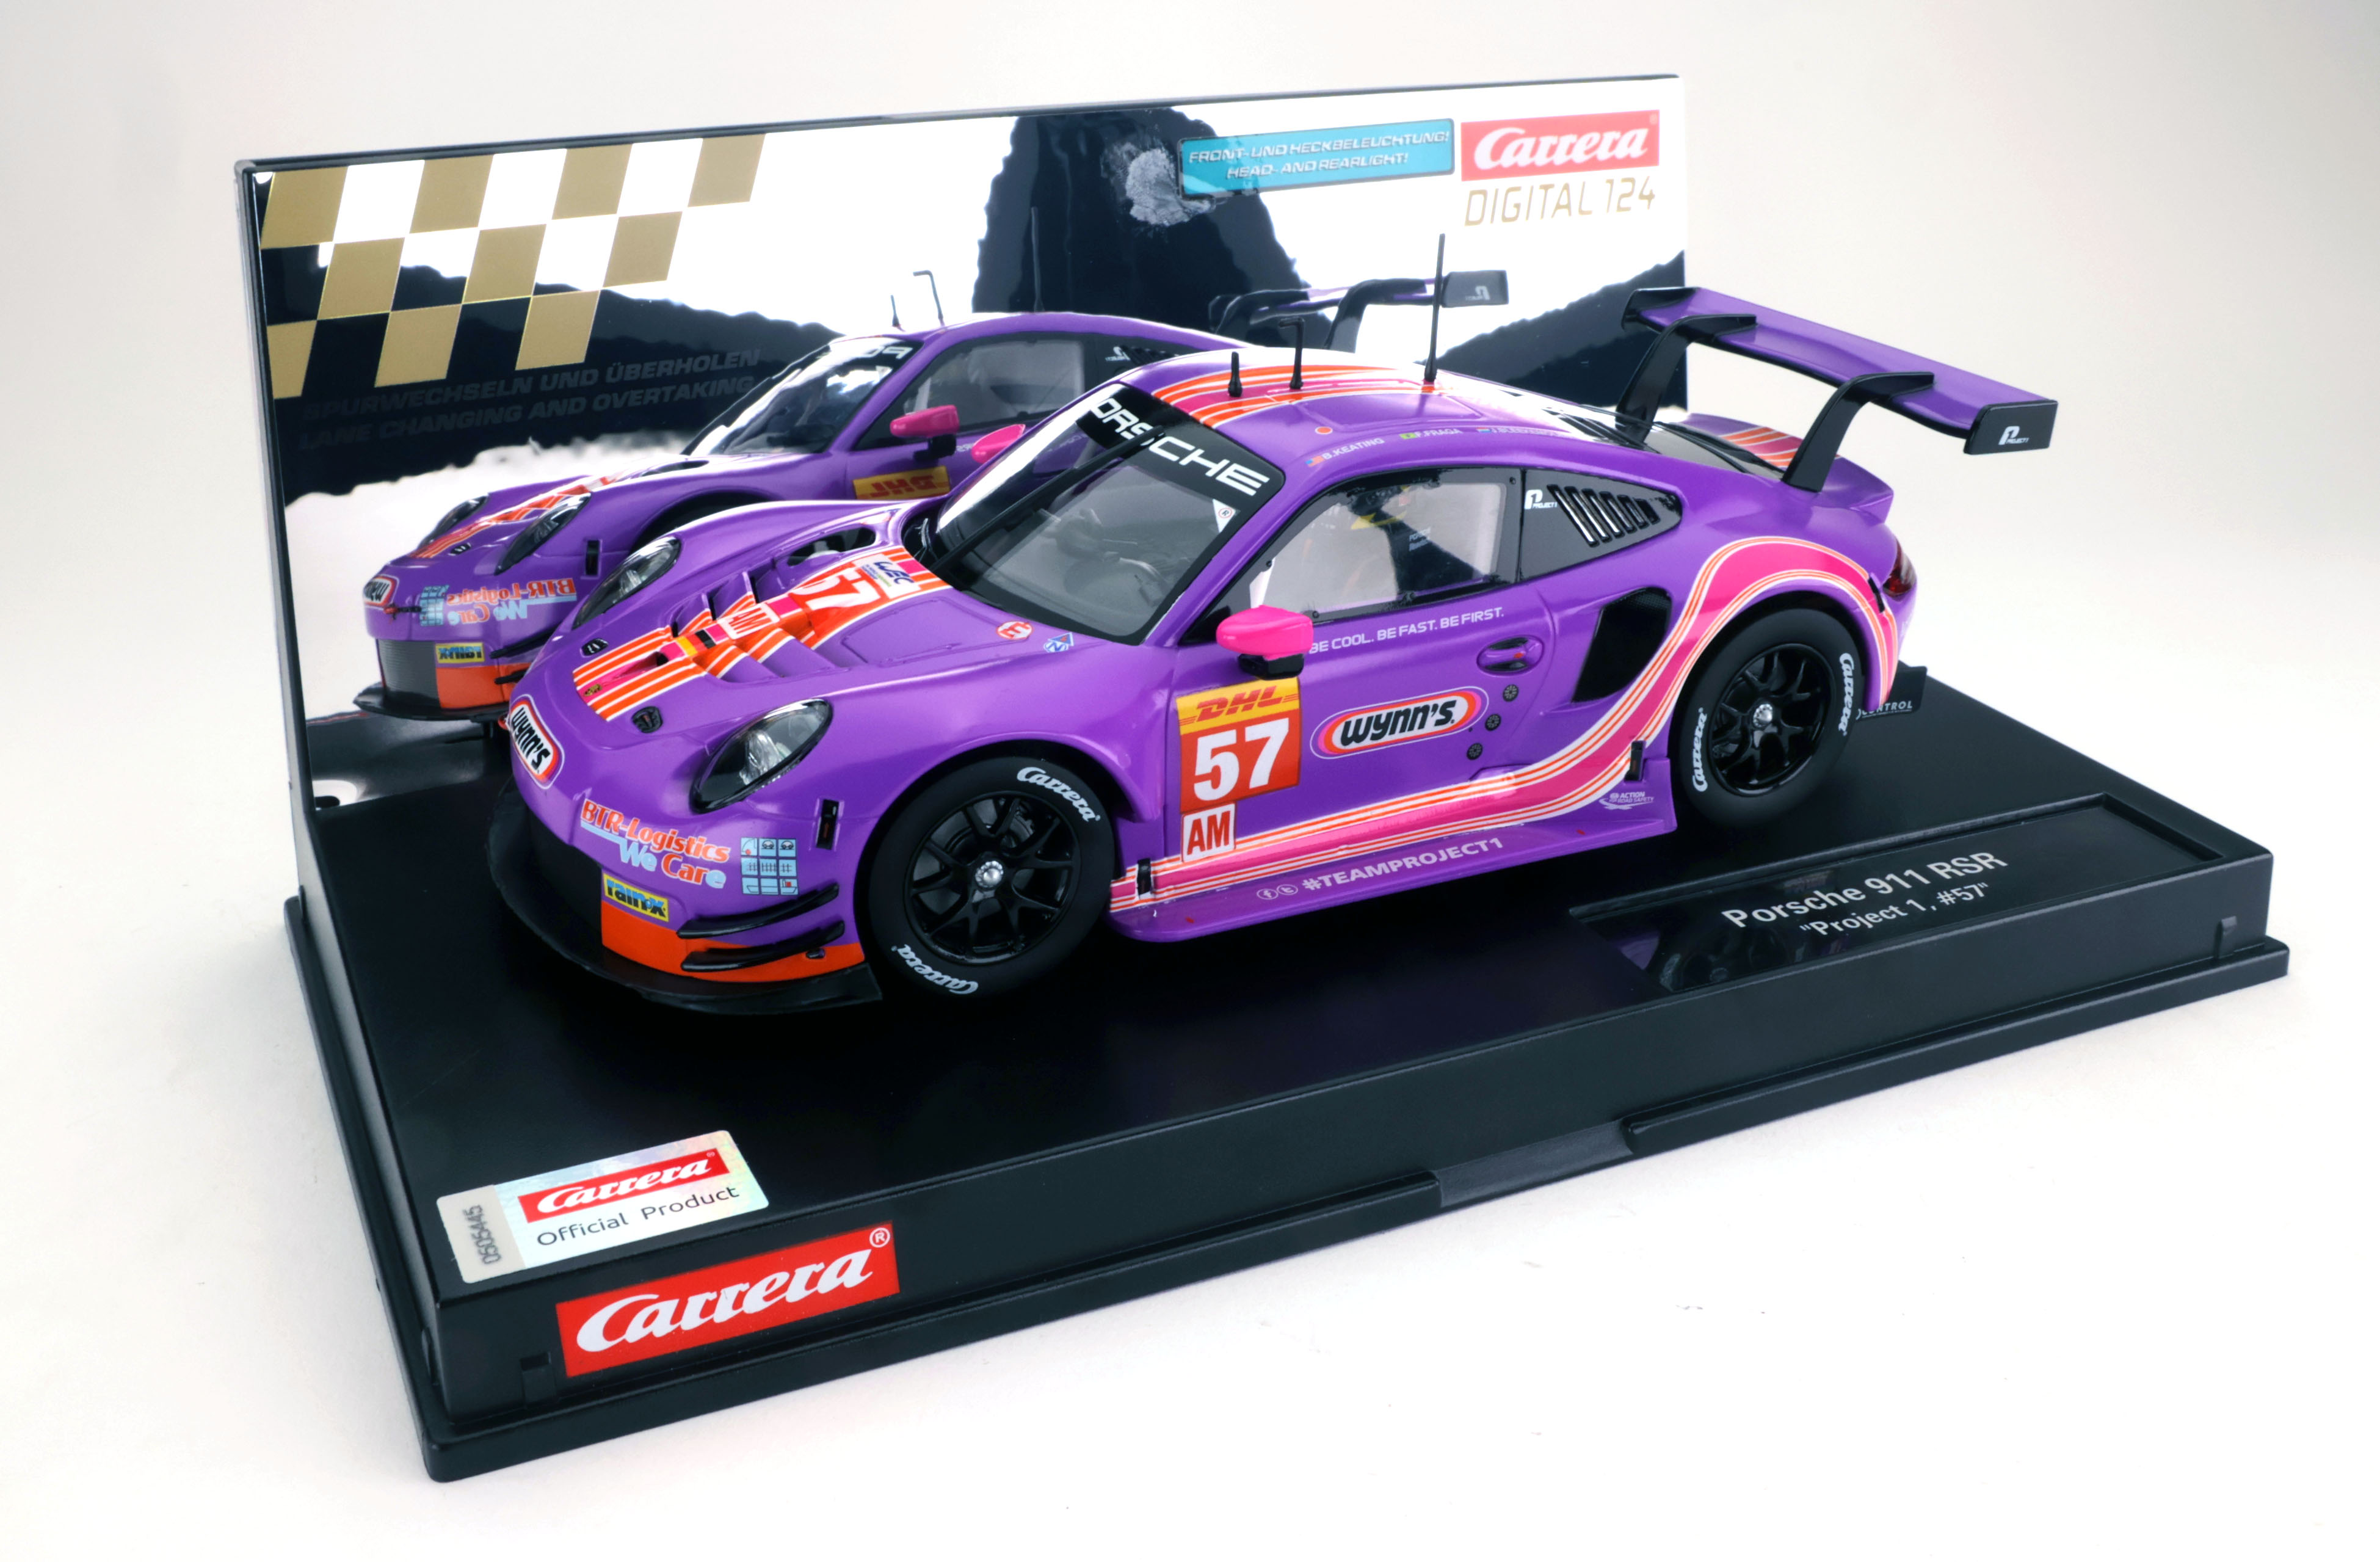 Carrera 23913 - Porsche 911 RSR, Project 1 #57 - Digital 124 [23913] -  $159.95 : Electric Dreams, New and Vintage Slot Cars, New and Vintage Slot  Cars